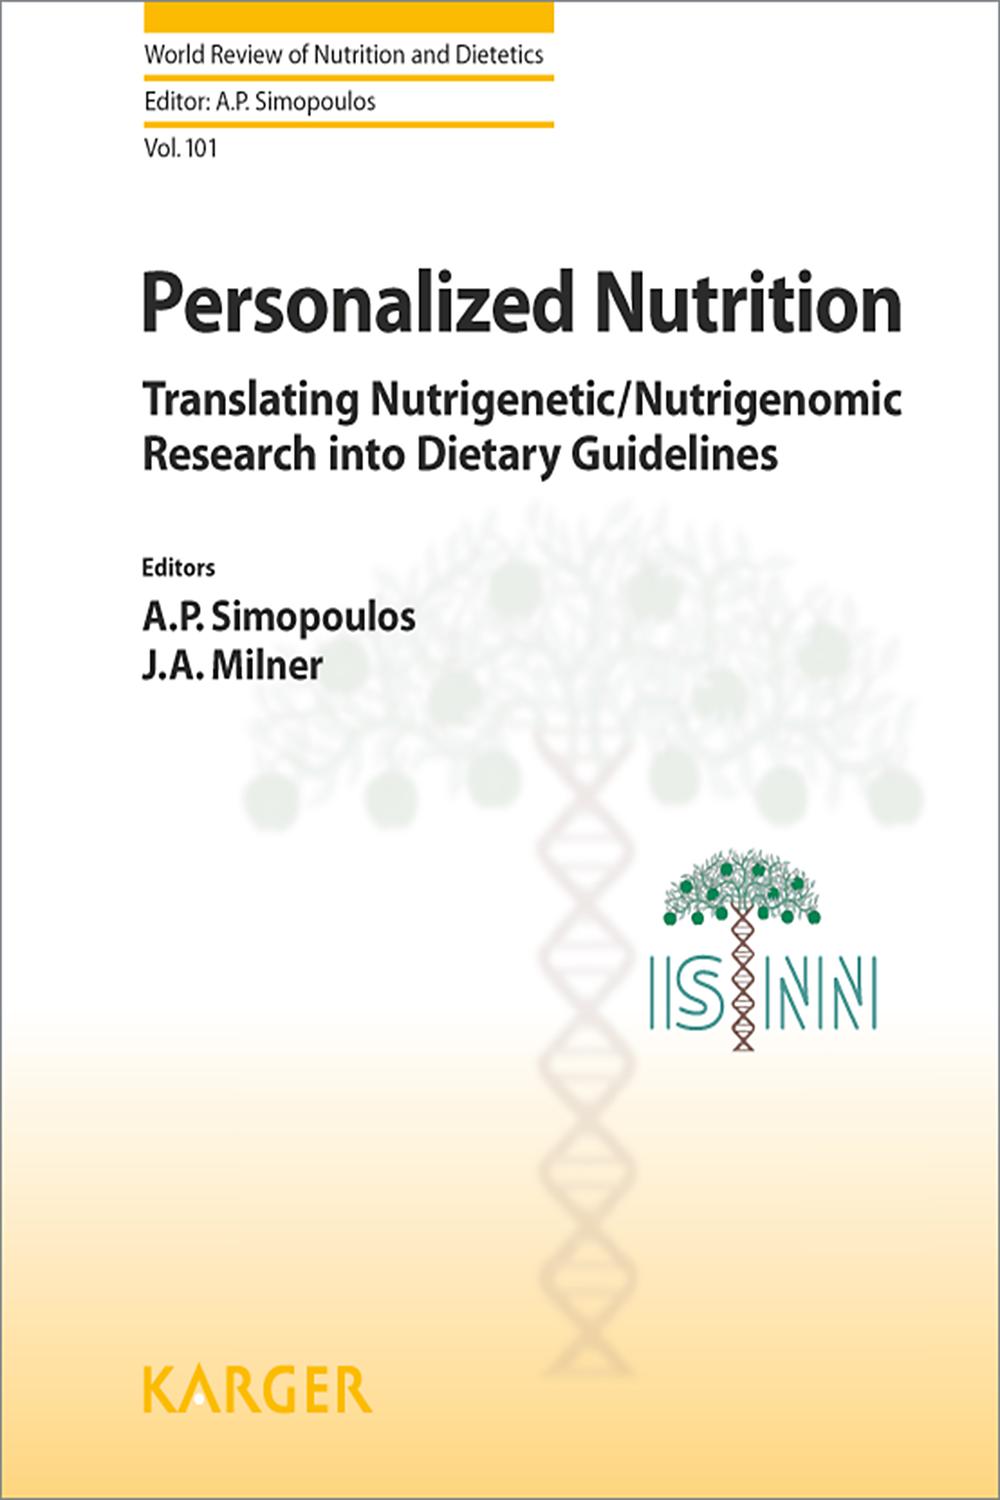 Personalized Nutrition - A. P. Simopoulos, J. A. Milner